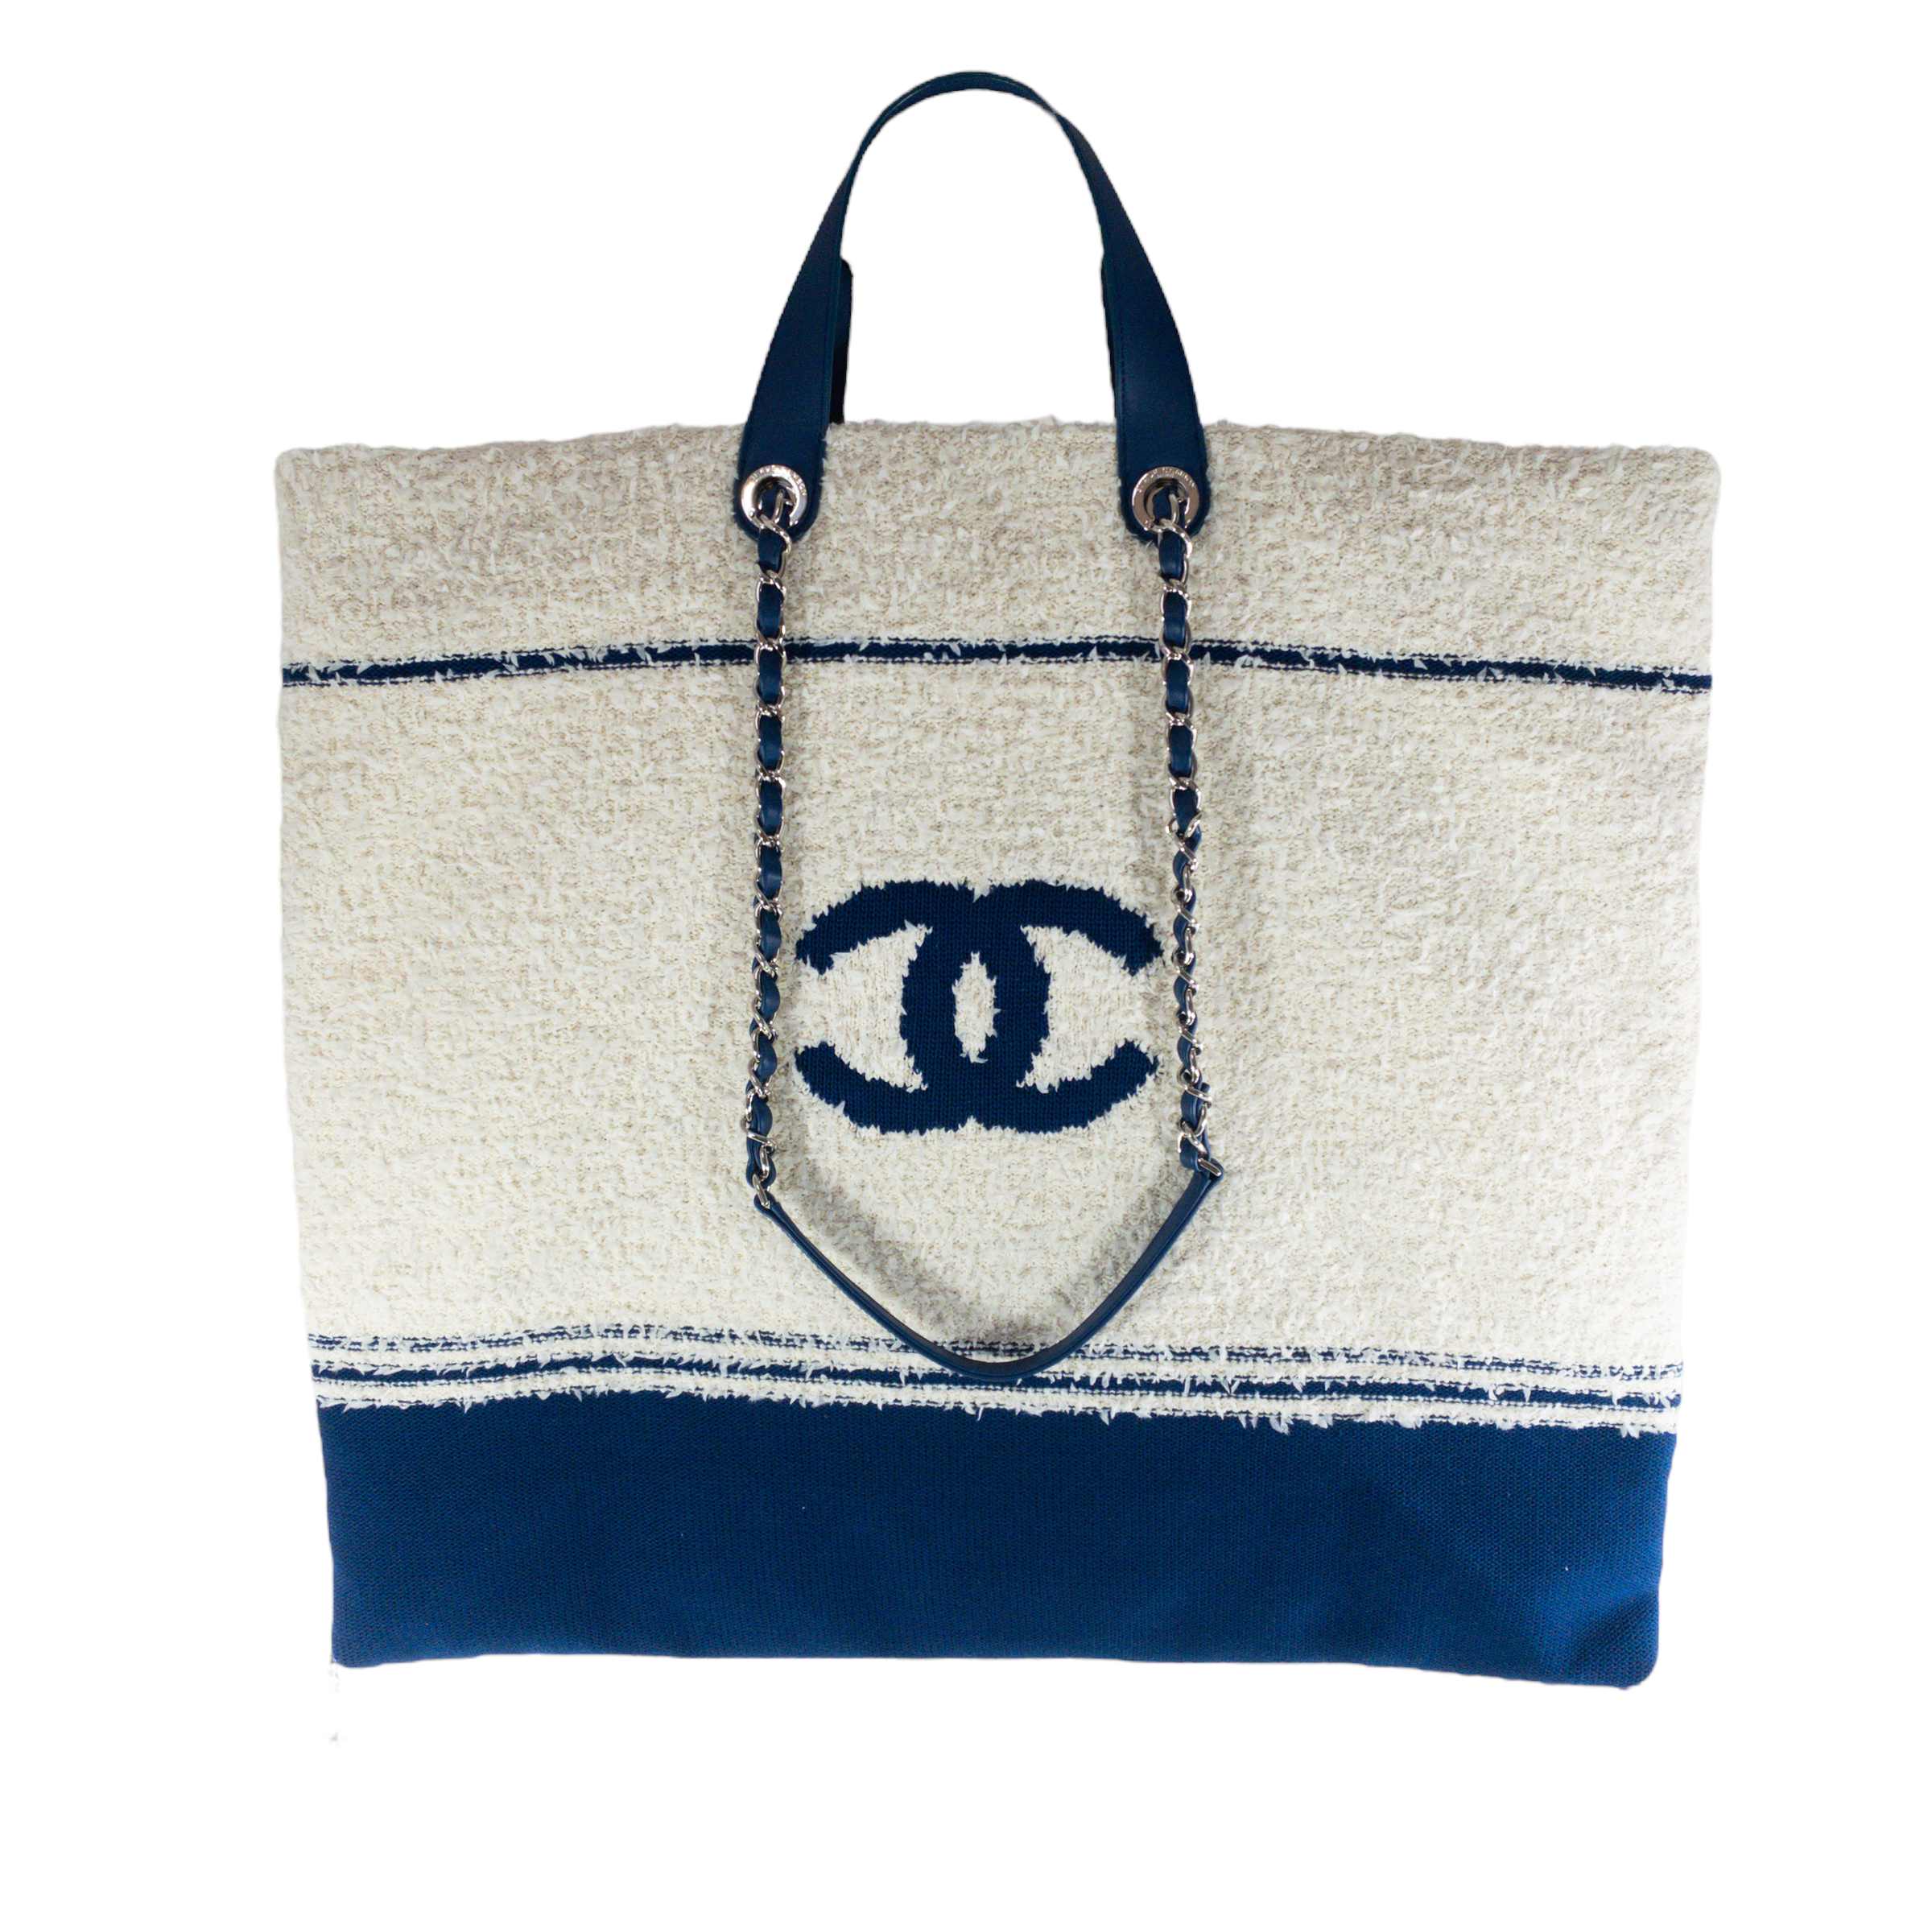 Chanel XL Tweed Deauville/Biarritz Tote